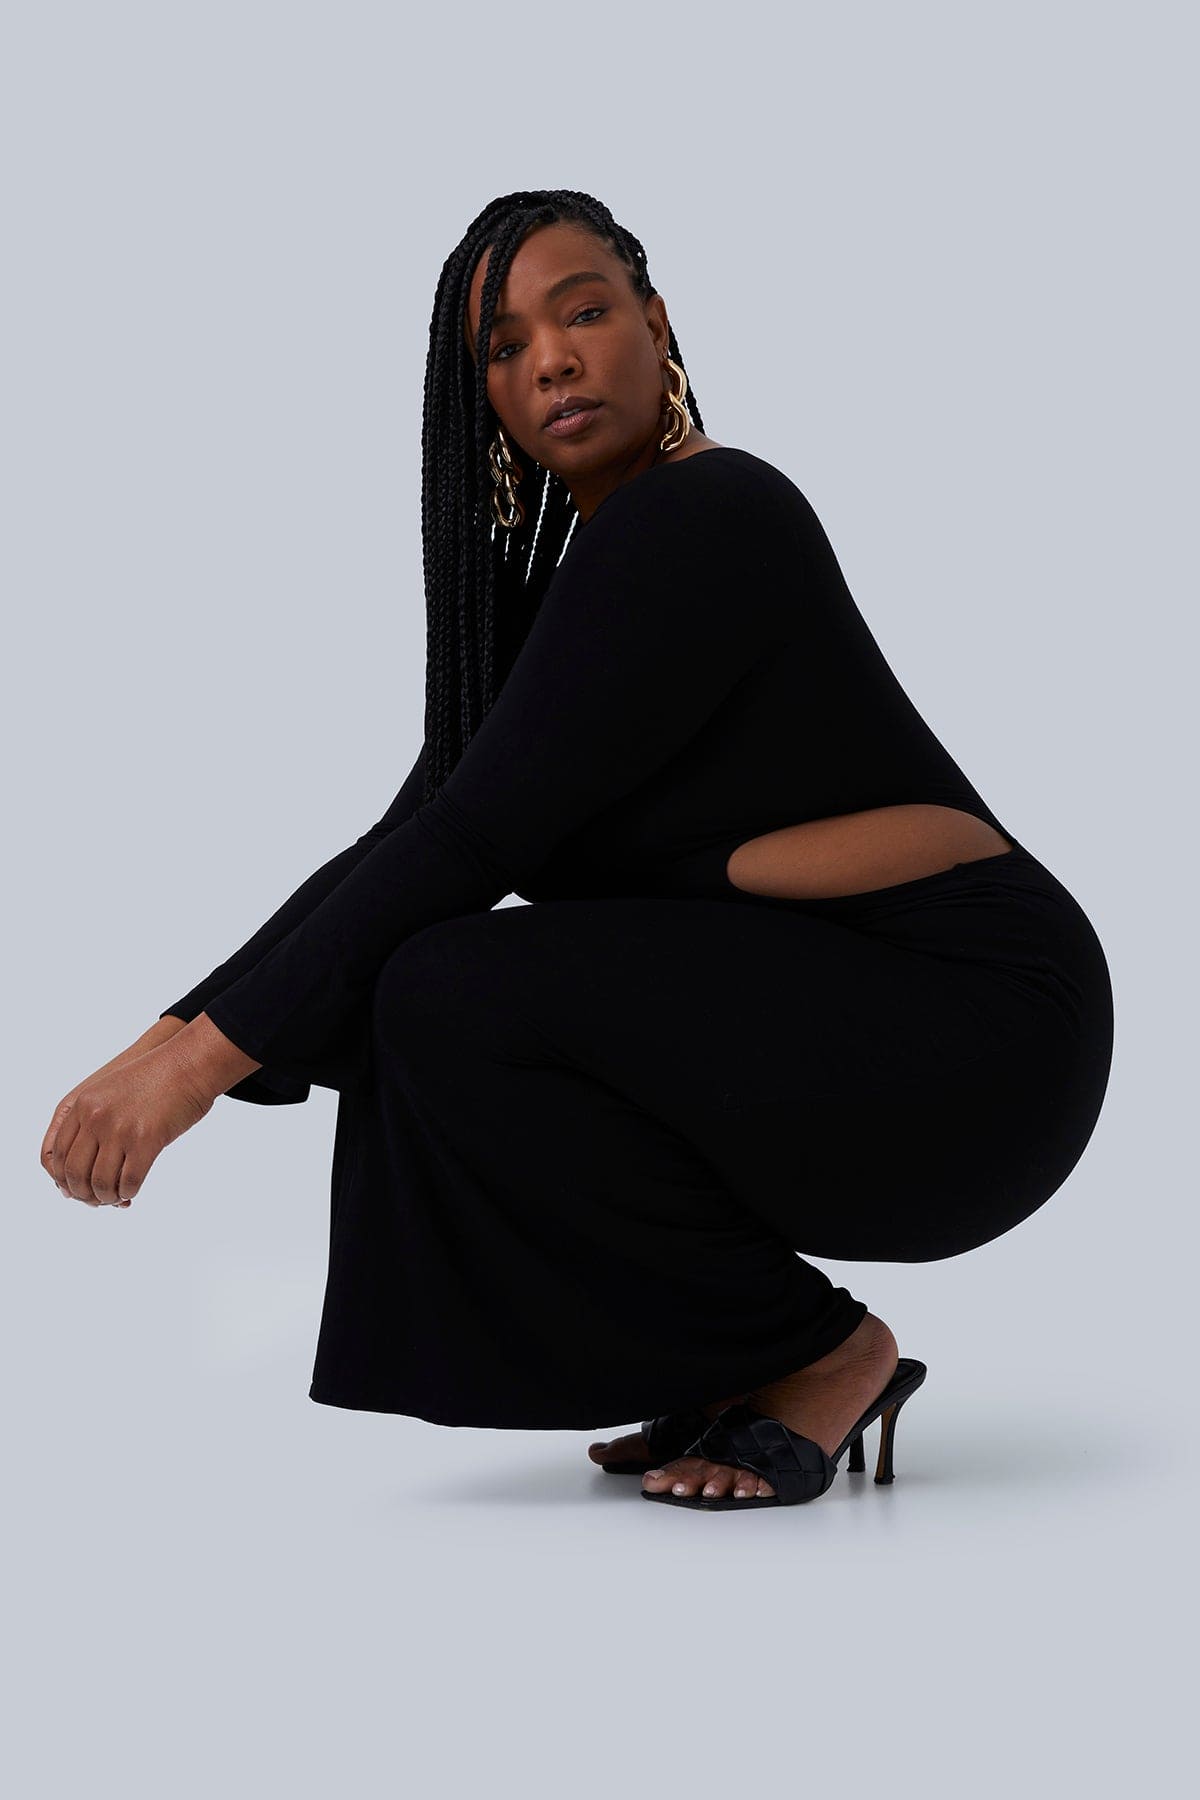 Model squatting from the side in Gabrielle Maxi dress for plus size women. Size oval cutout in this stretchy, double layered fabric. Model has long black braids over her shoulder and is looking straight into the camera.